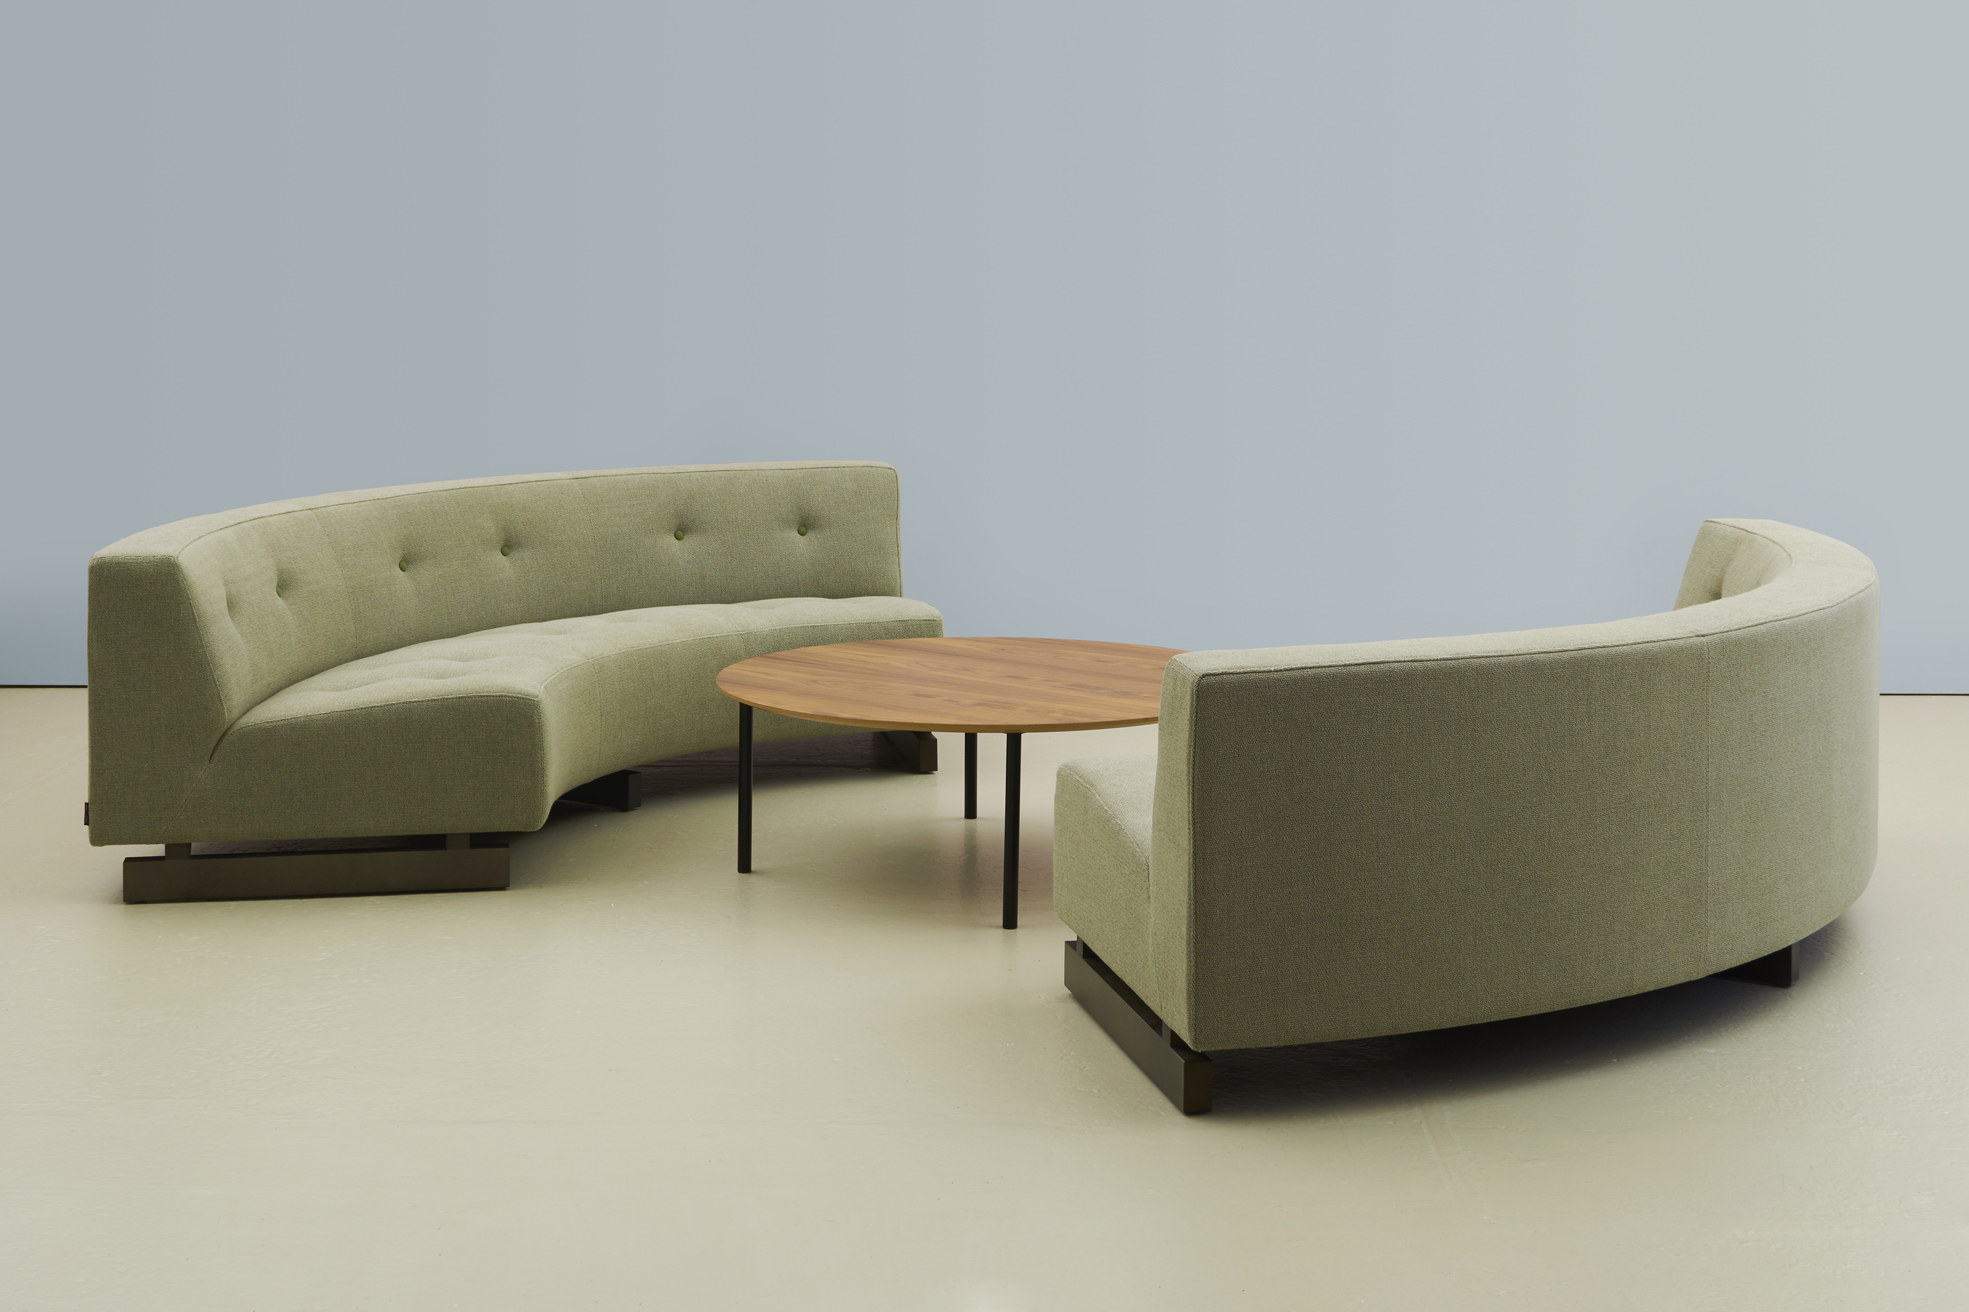 hm46v1 curved sofa with hm18z table (3) (low res).jpg